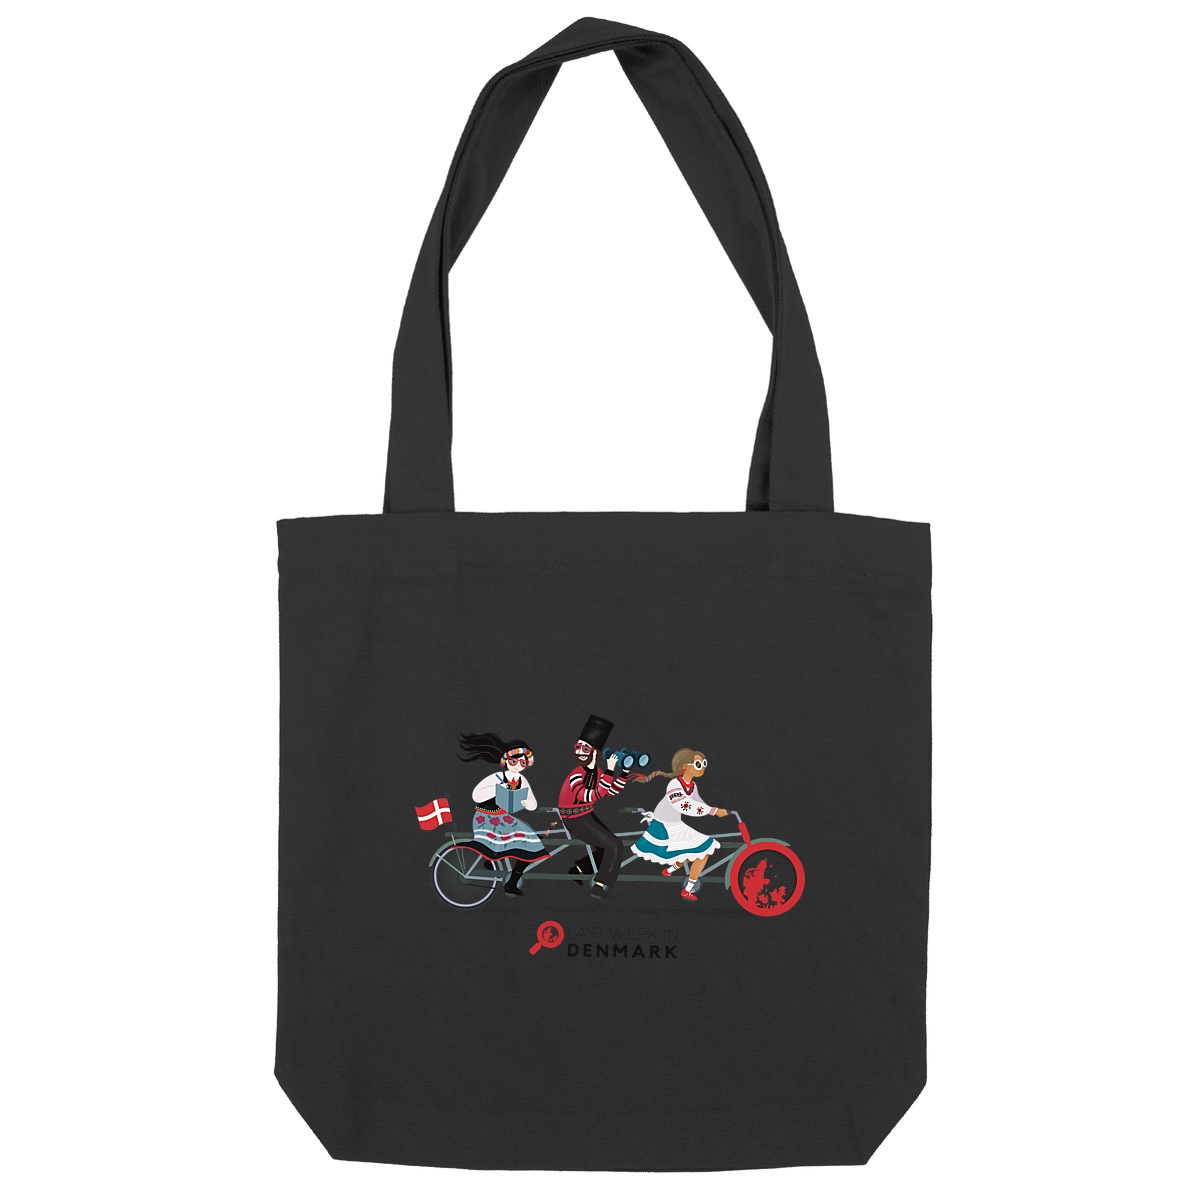 Heavy totebag “New Denmark” collection “Searching for home”